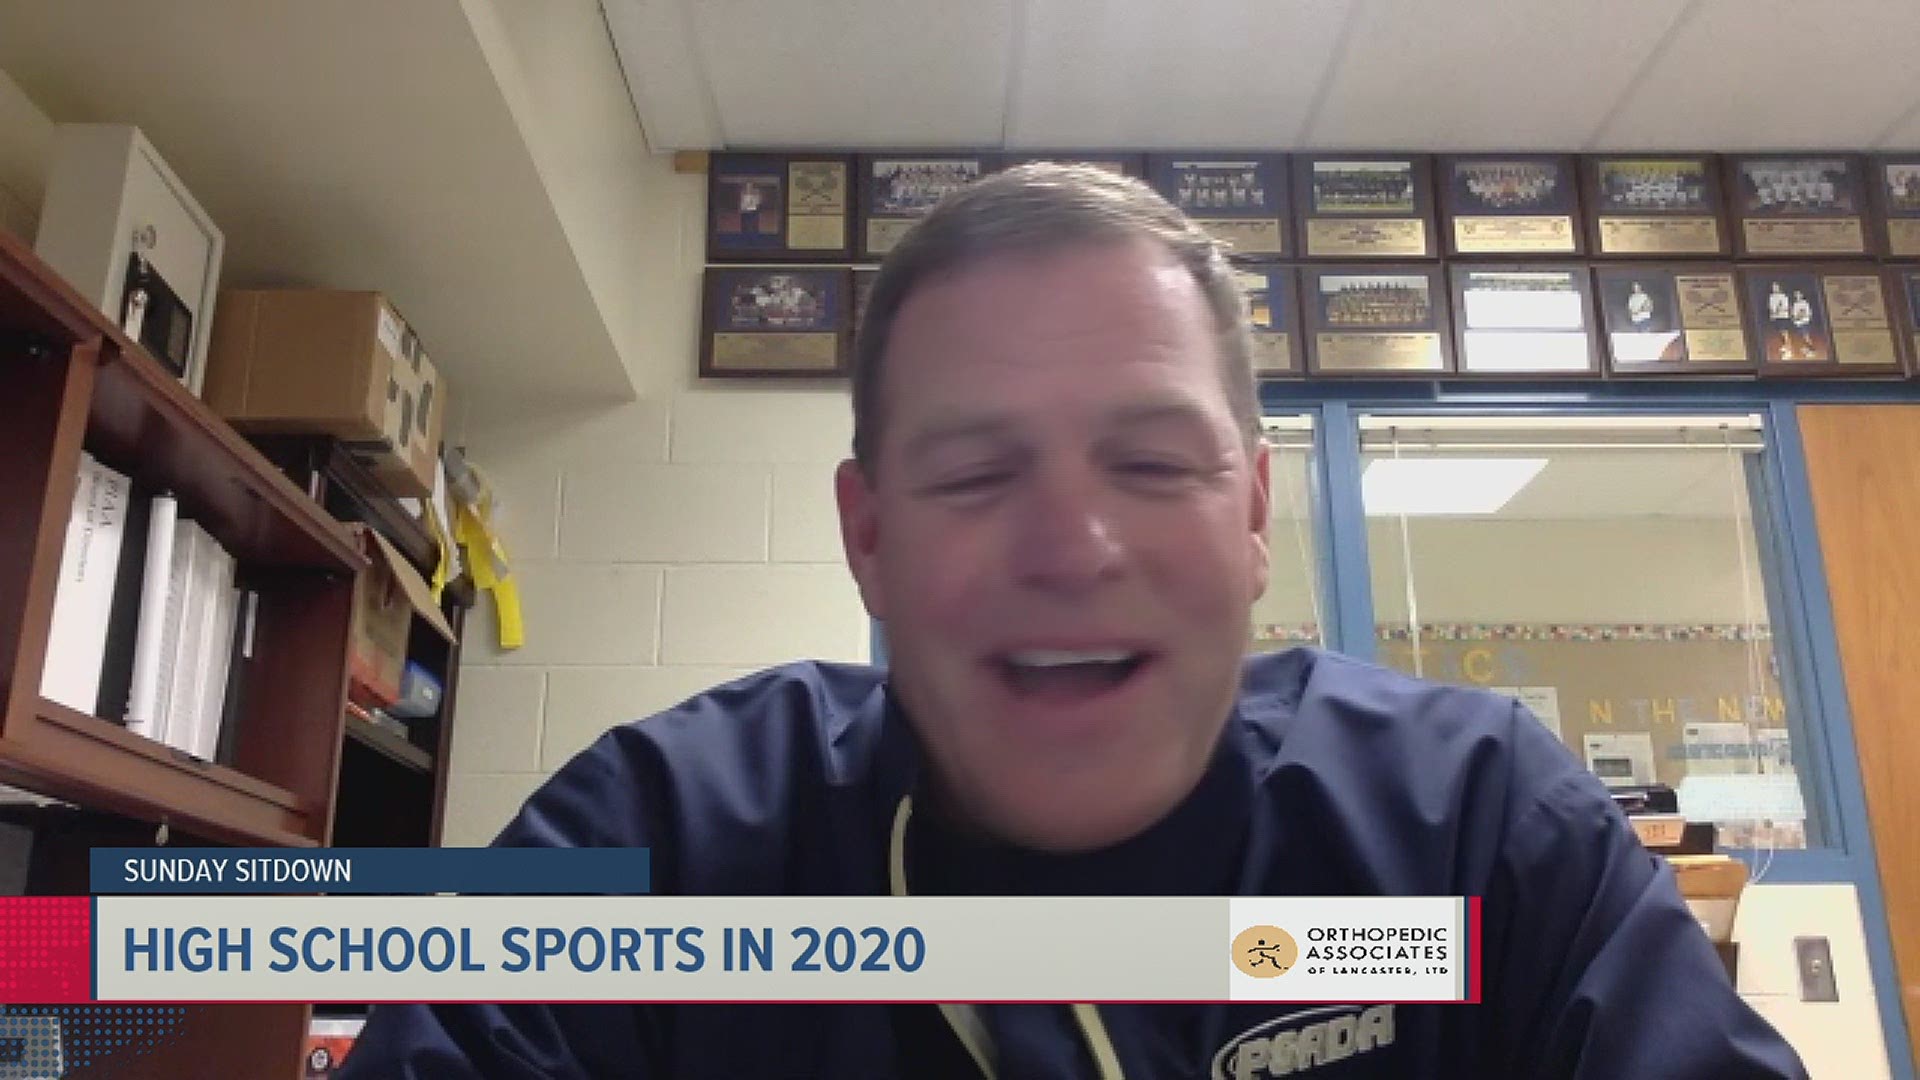 FOX43 sits down with ELCO Athletic Director Doug Bohannon to discuss the fall sports season and looking ahead to the start of winter sports.